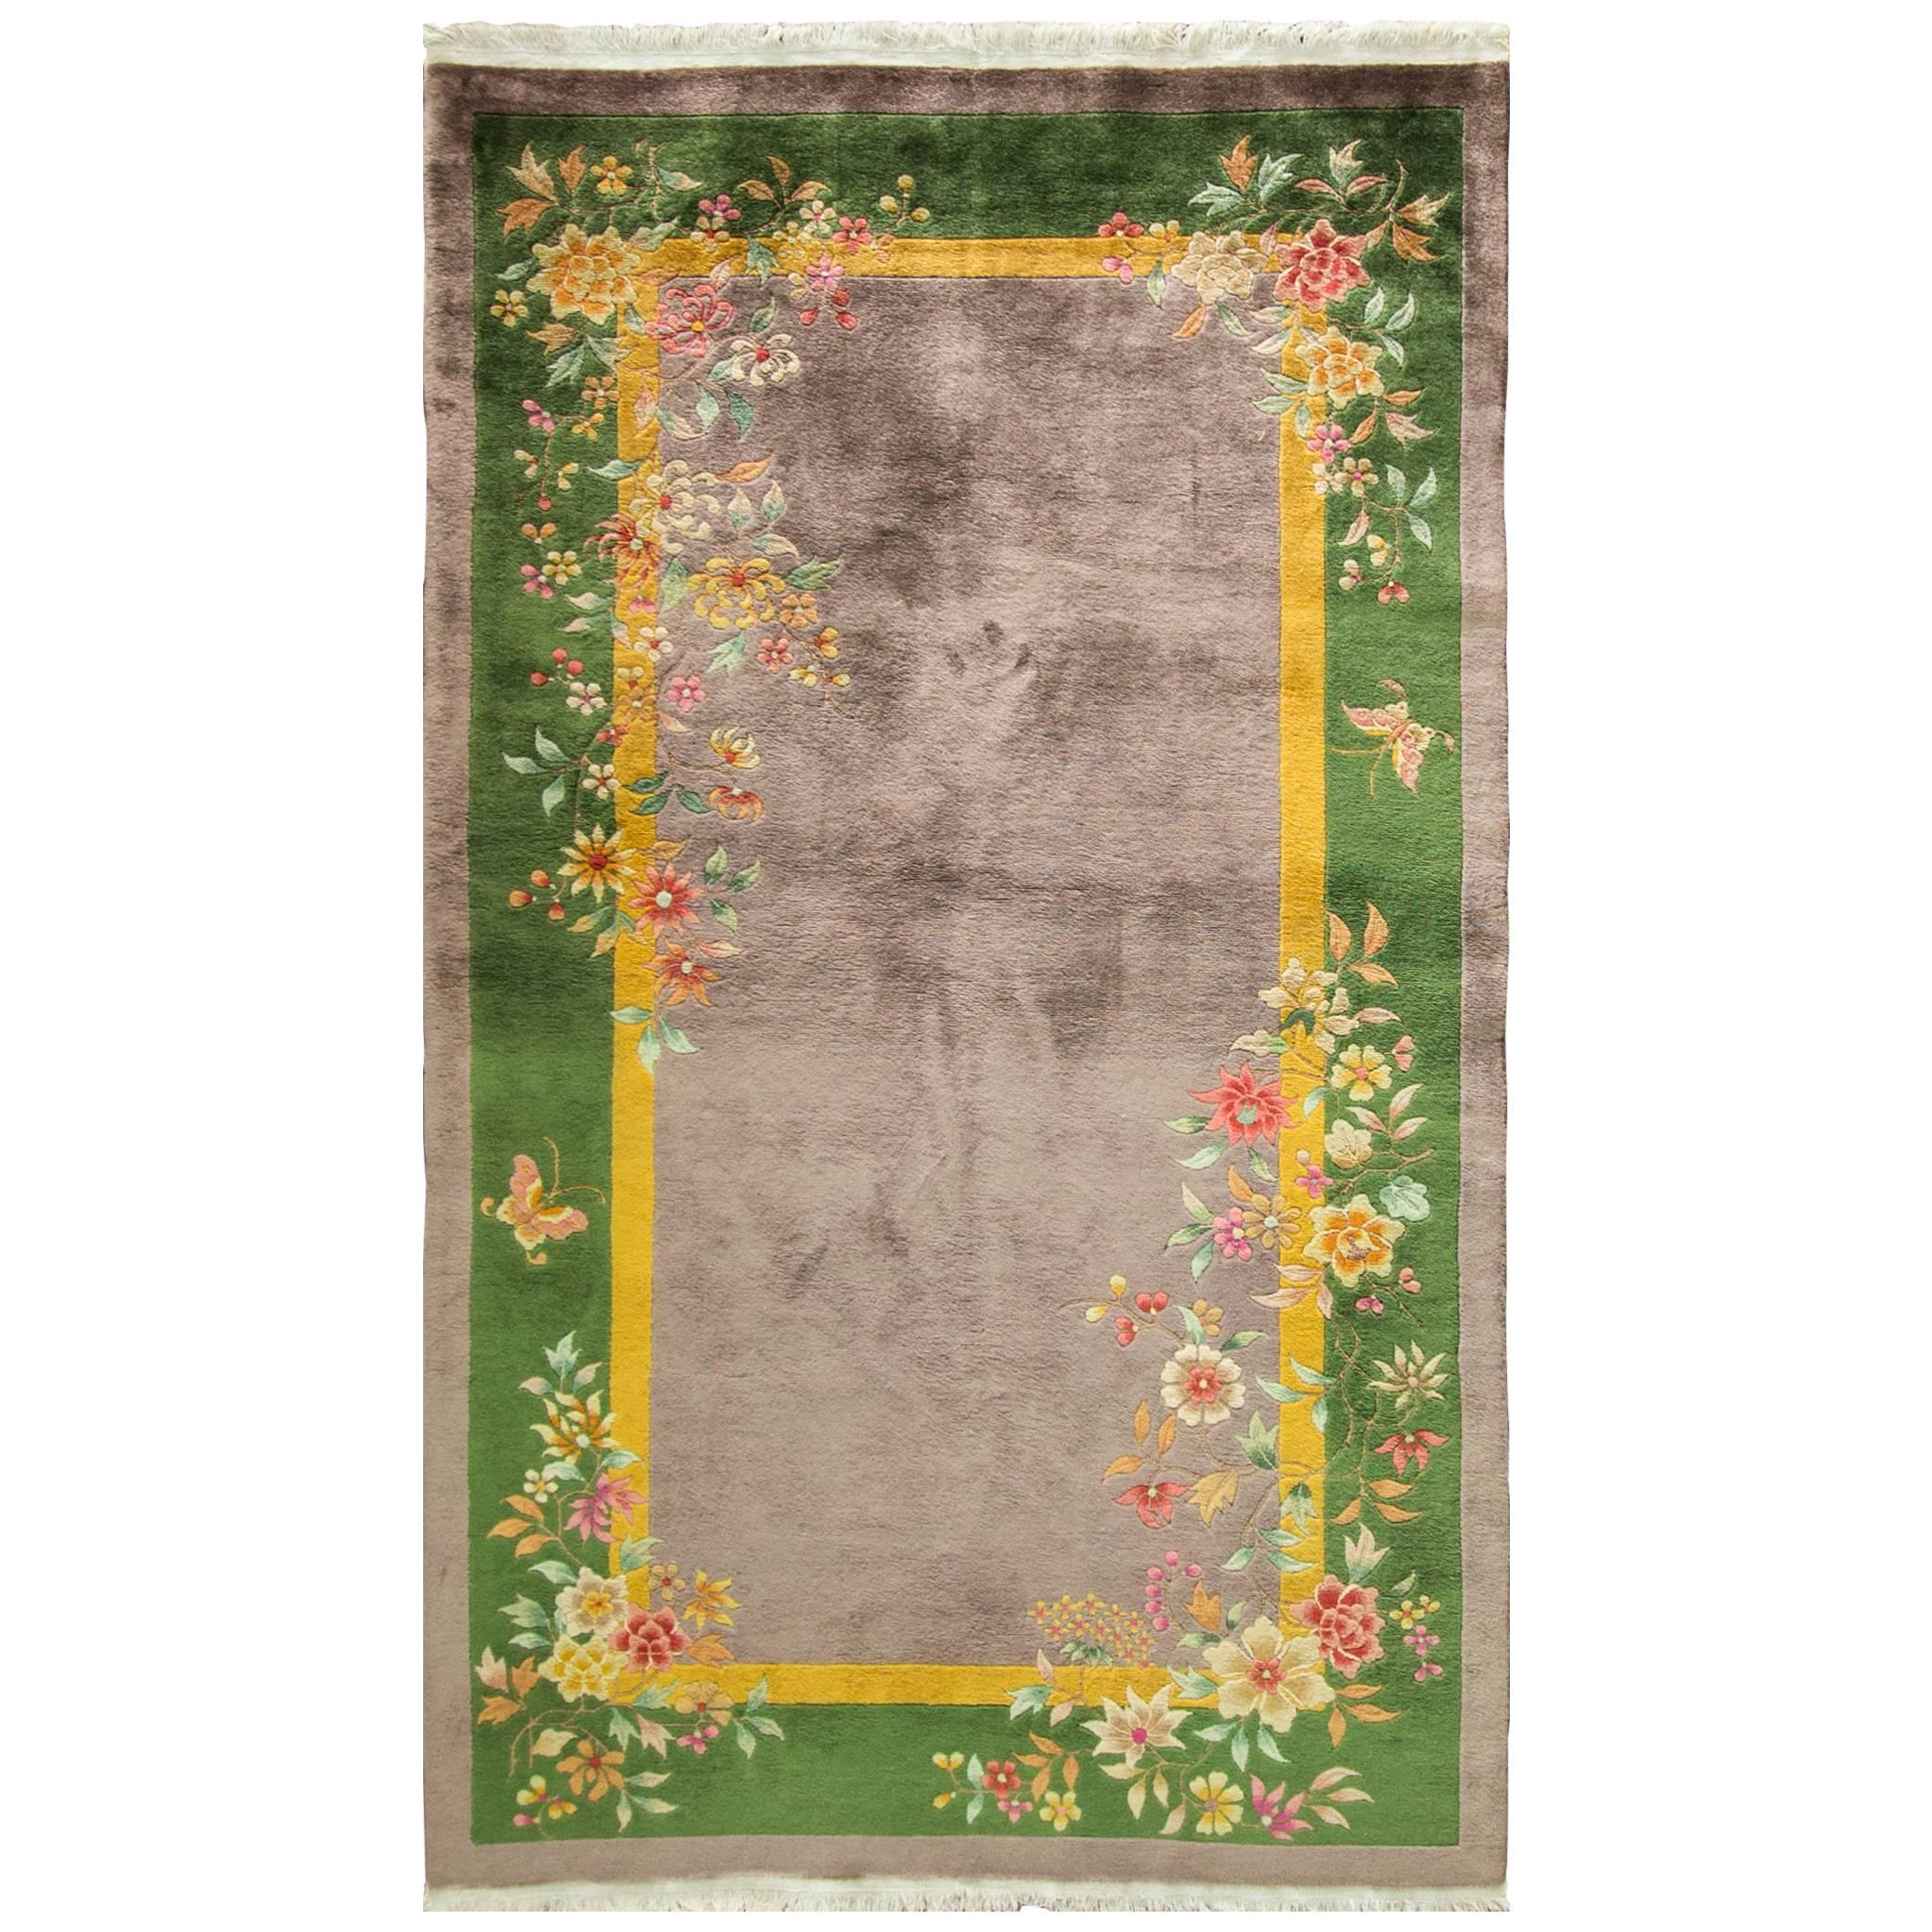 Great Antique Art Deco Chinese Rug